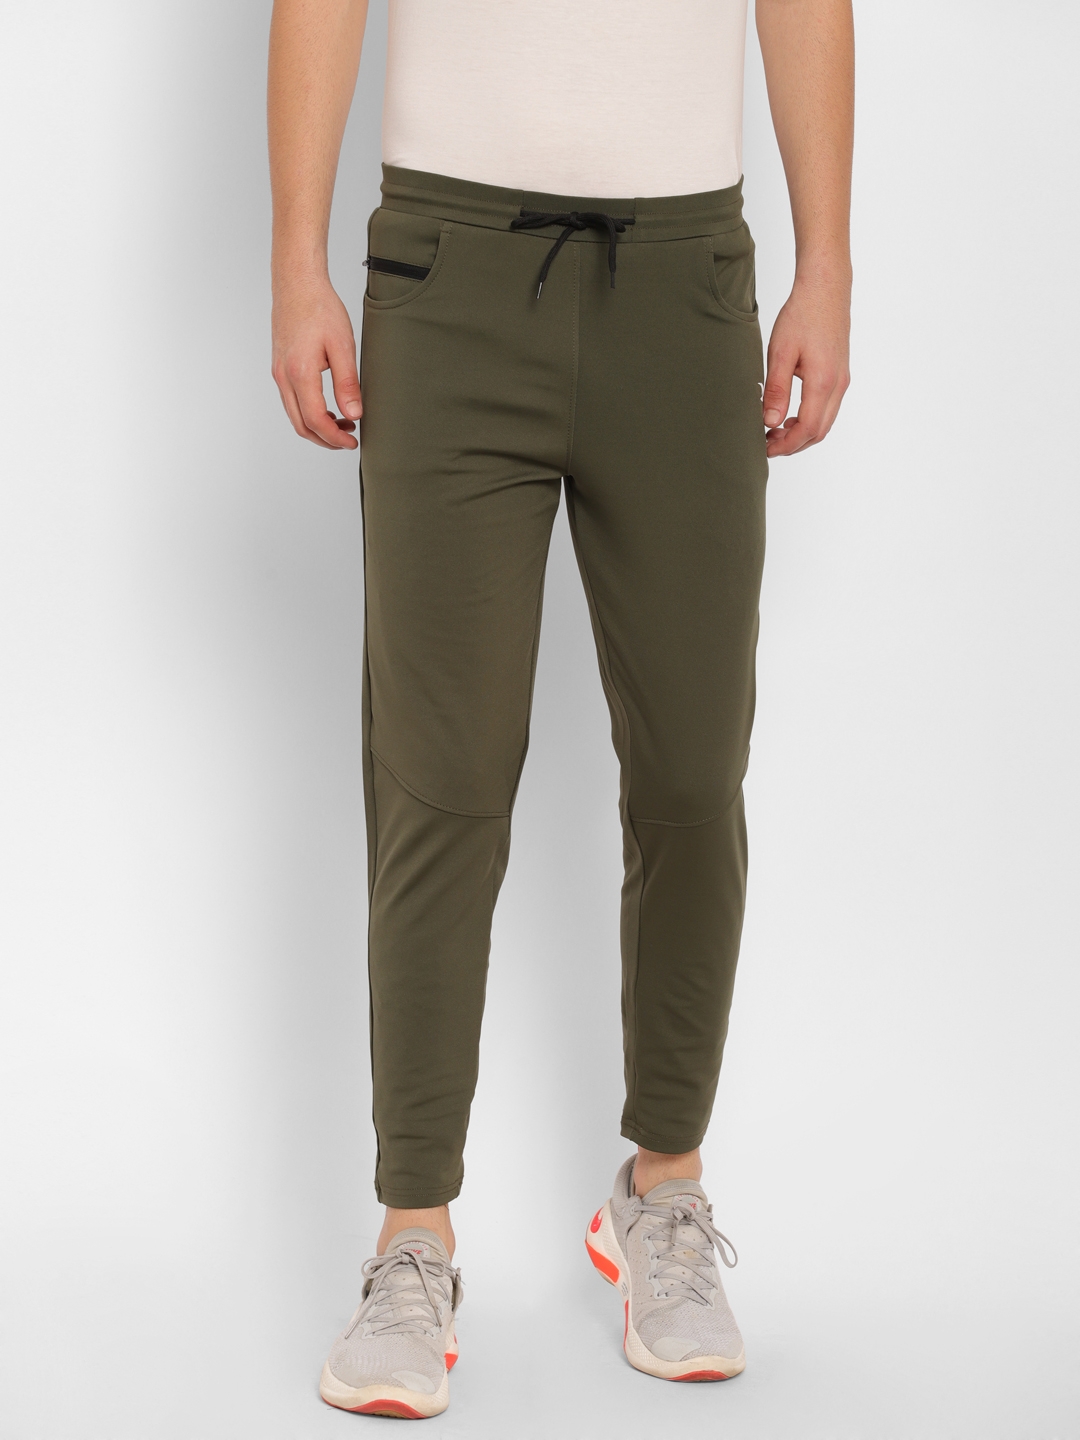 Cape Canary | Cape Canary Men's Olive Green Cotton Lycra Solid Slim-Fit Jogger Pants